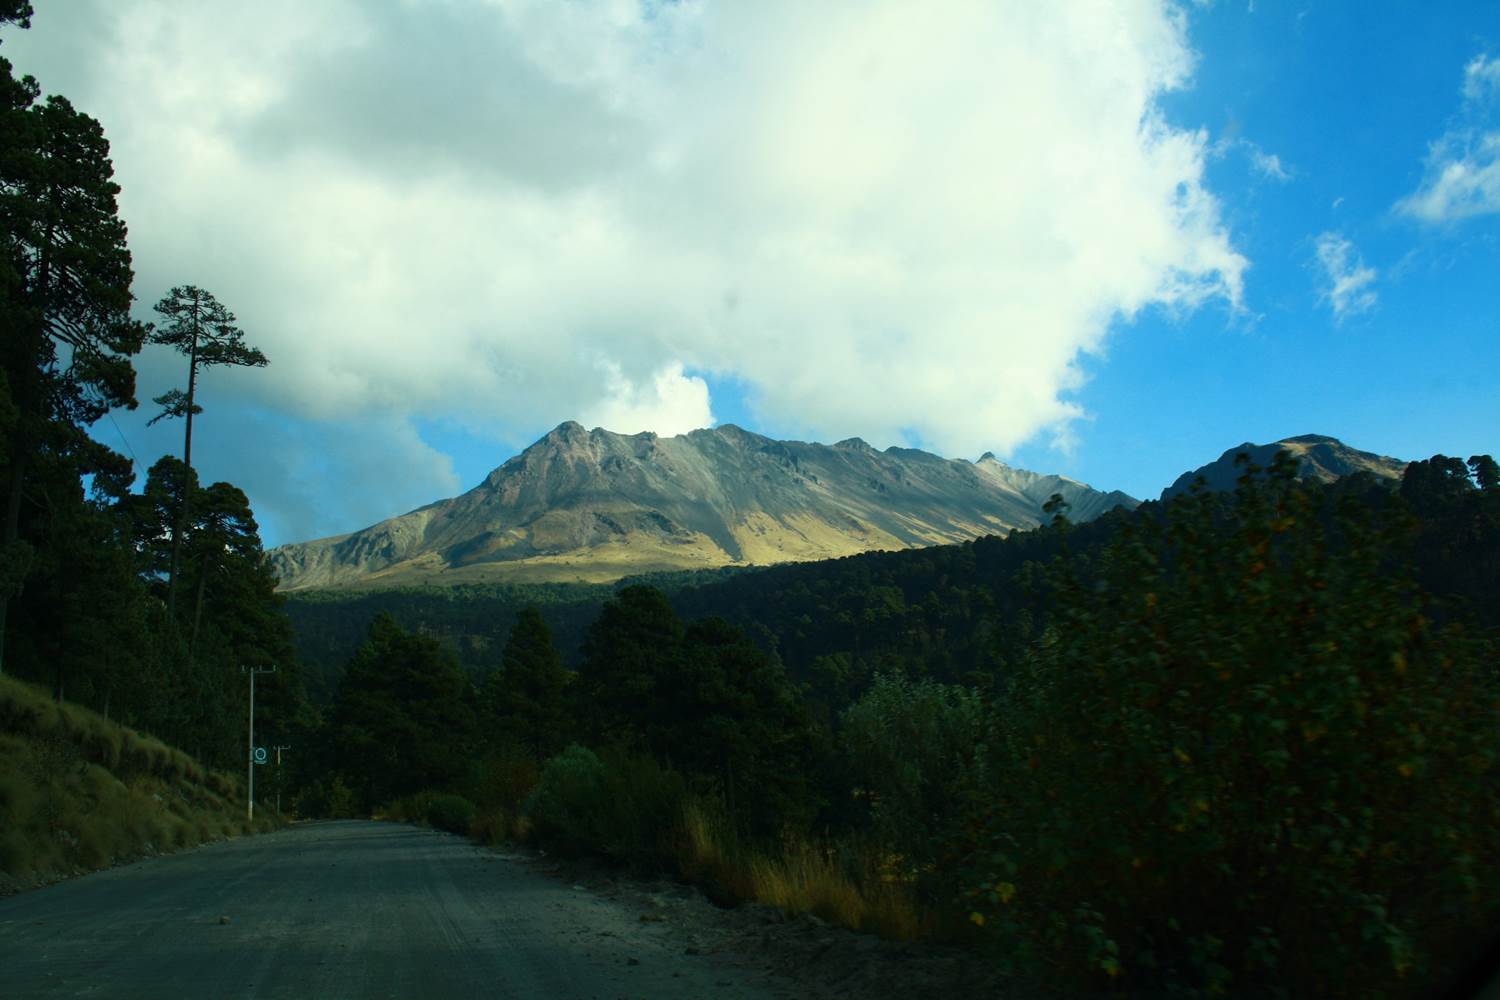 Road up to the crater of Nevado de Toluca